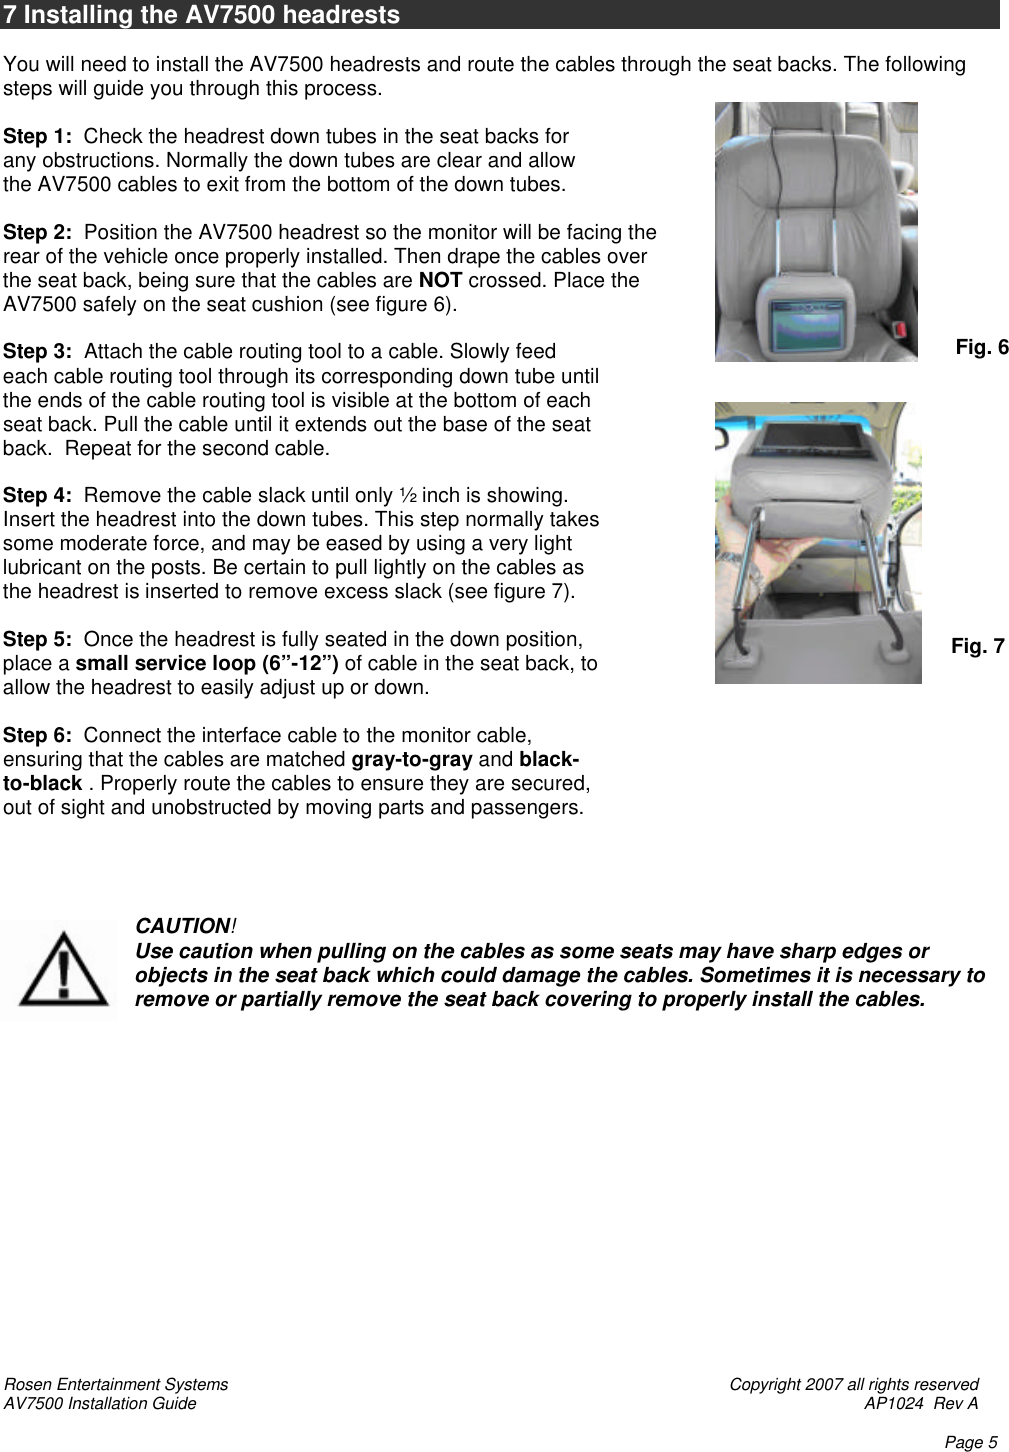 Rosen Entertainment Systems    Copyright 2007 all rights reserved AV7500 Installation Guide    AP1024  Rev A    Page 5   7 Installing the AV7500 headrests  You will need to install the AV7500 headrests and route the cables through the seat backs. The following steps will guide you through this process.  Step 1:  Check the headrest down tubes in the seat backs for any obstructions. Normally the down tubes are clear and allow the AV7500 cables to exit from the bottom of the down tubes.   Step 2:  Position the AV7500 headrest so the monitor will be facing the rear of the vehicle once properly installed. Then drape the cables over the seat back, being sure that the cables are NOT crossed. Place the AV7500 safely on the seat cushion (see figure 6).   Step 3:  Attach the cable routing tool to a cable. Slowly feed each cable routing tool through its corresponding down tube until the ends of the cable routing tool is visible at the bottom of each seat back. Pull the cable until it extends out the base of the seat back.  Repeat for the second cable.  Step 4:  Remove the cable slack until only ½ inch is showing.  Insert the headrest into the down tubes. This step normally takes some moderate force, and may be eased by using a very light lubricant on the posts. Be certain to pull lightly on the cables as the headrest is inserted to remove excess slack (see figure 7).  Step 5:  Once the headrest is fully seated in the down position, place a small service loop (6”-12”) of cable in the seat back, to allow the headrest to easily adjust up or down.  Step 6:  Connect the interface cable to the monitor cable, ensuring that the cables are matched gray-to-gray and black-to-black . Properly route the cables to ensure they are secured, out of sight and unobstructed by moving parts and passengers.     CAUTION! Use caution when pulling on the cables as some seats may have sharp edges or objects in the seat back which could damage the cables. Sometimes it is necessary to remove or partially remove the seat back covering to properly install the cables.                Fig. 6 Fig. 7  